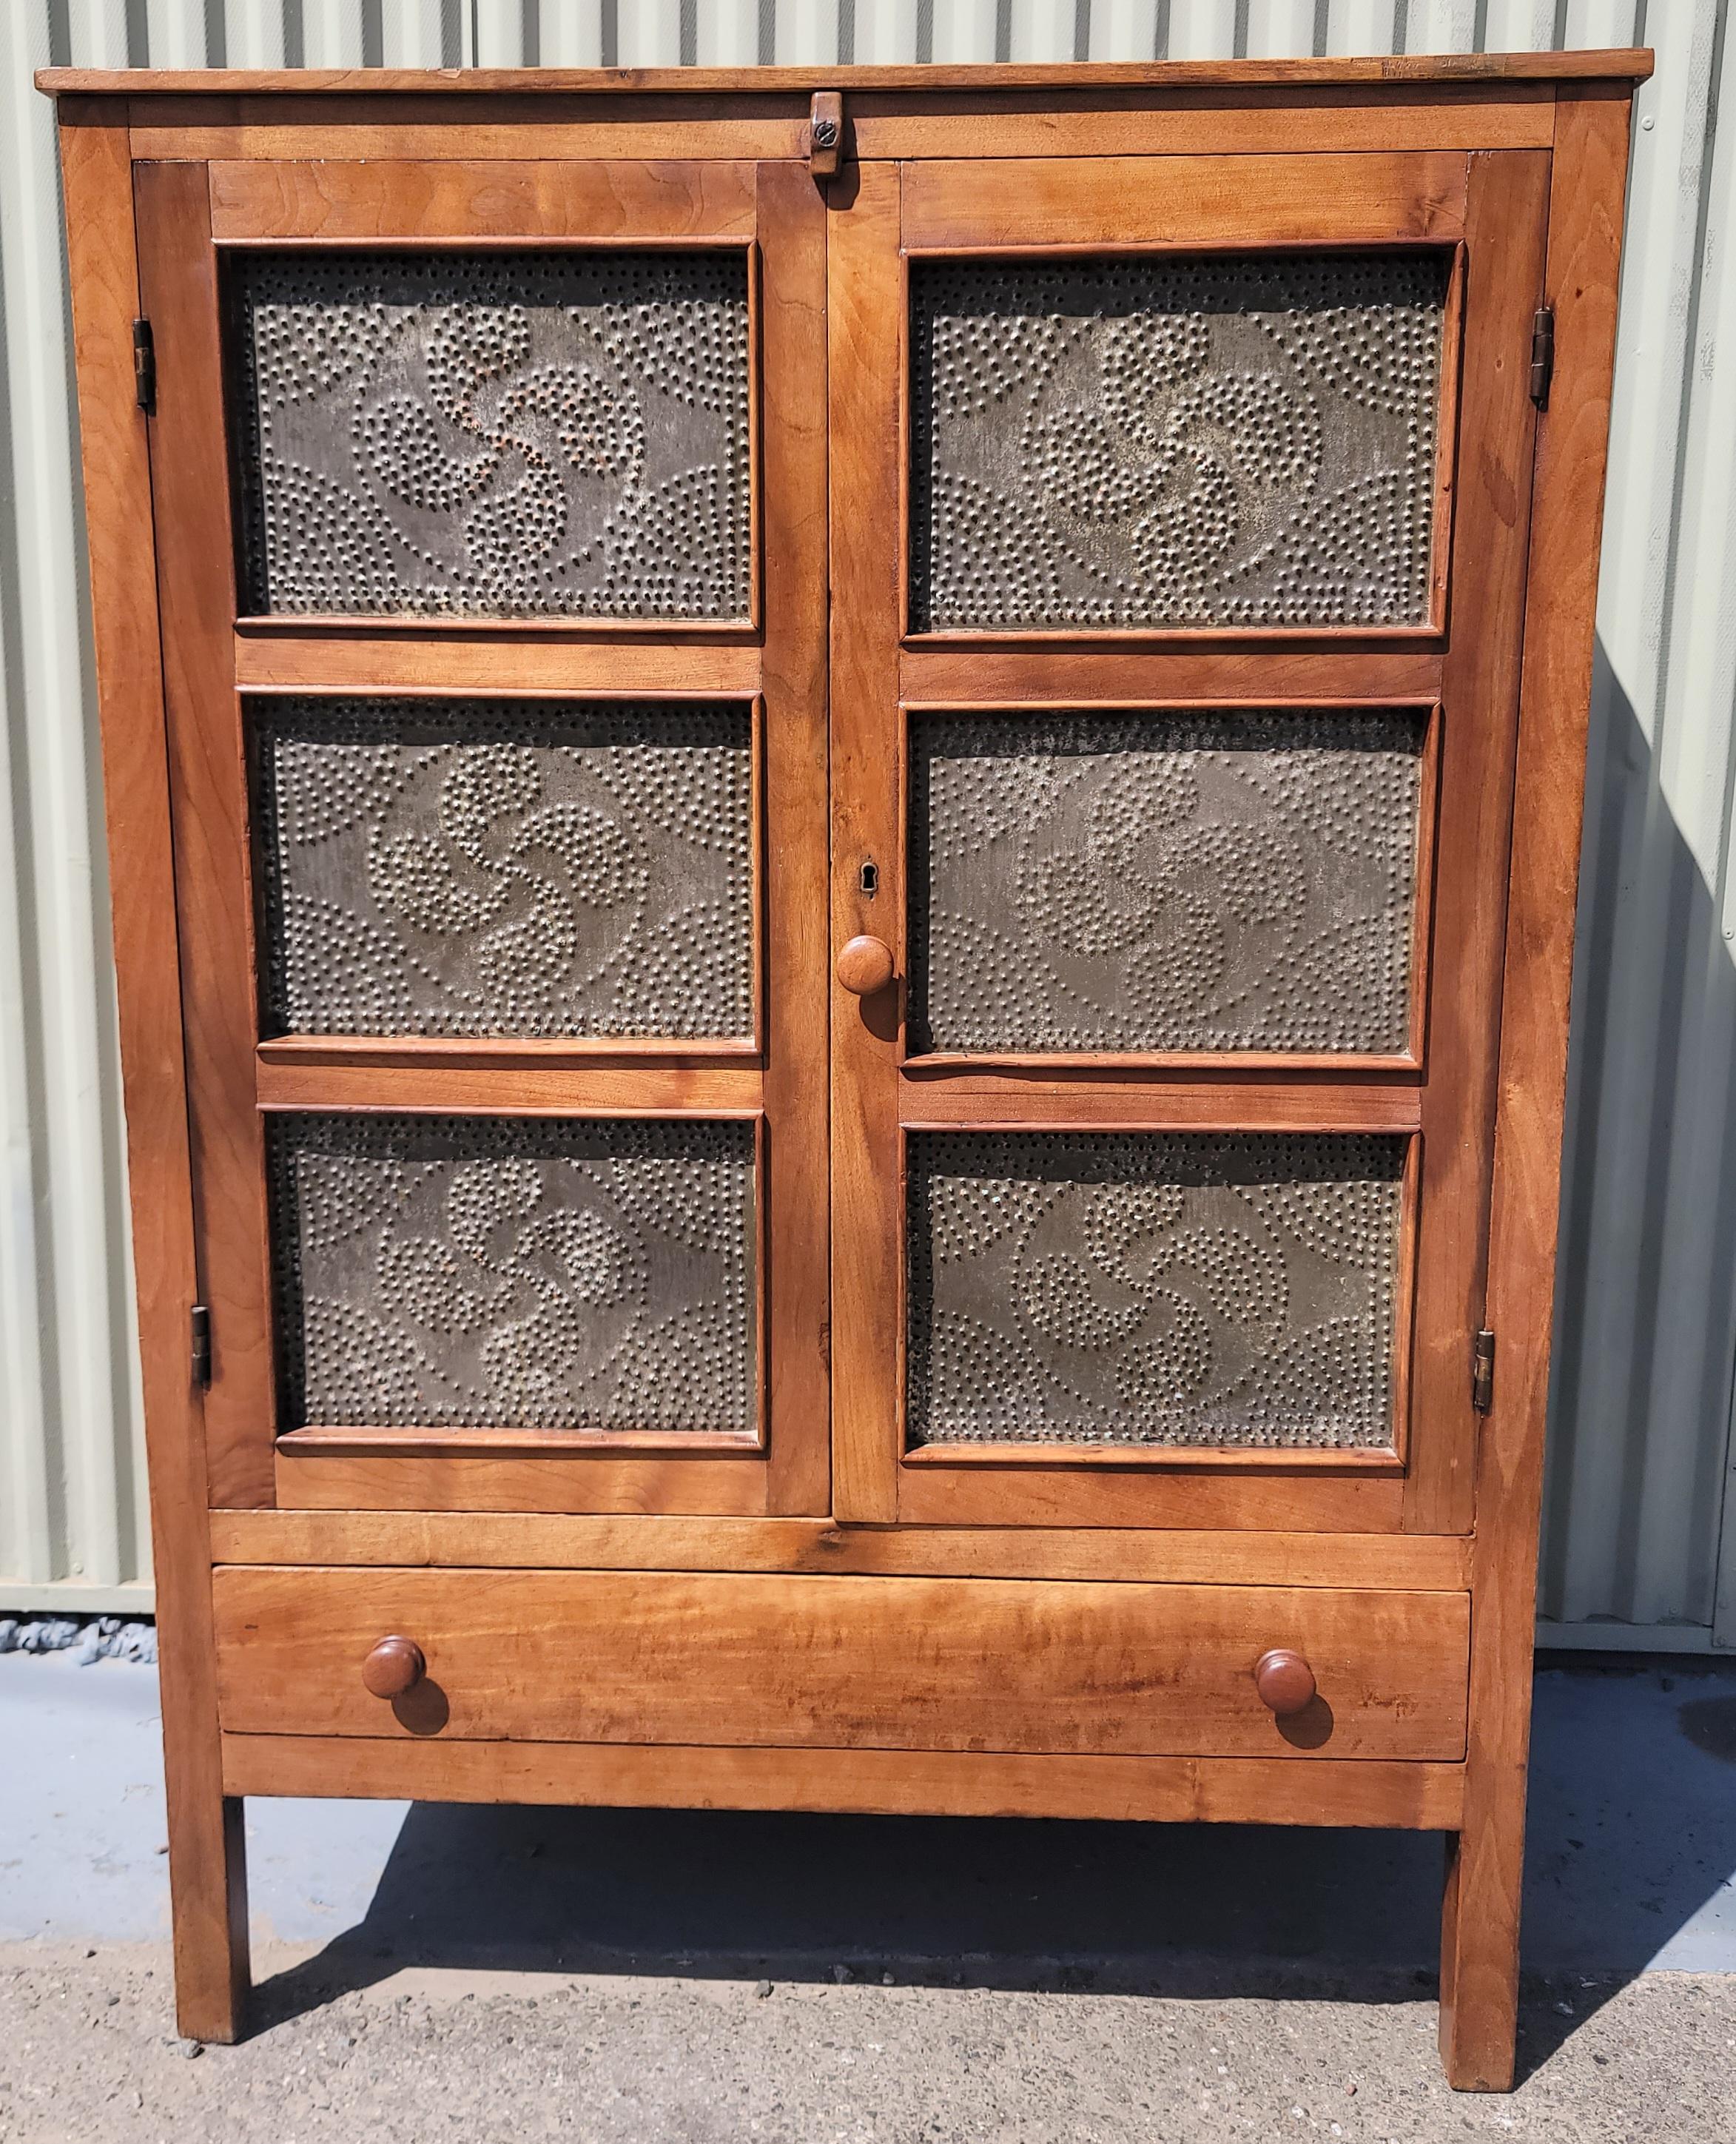 Amazing 19Thc Walnut pie safe with original punched pin wheel pattern tins.This fine hand made walnut pie safe has cut nail construction and wood pegs.The inside shelf's  have a nice mellow patina and a light coat of wax or varnish.Amazing picture